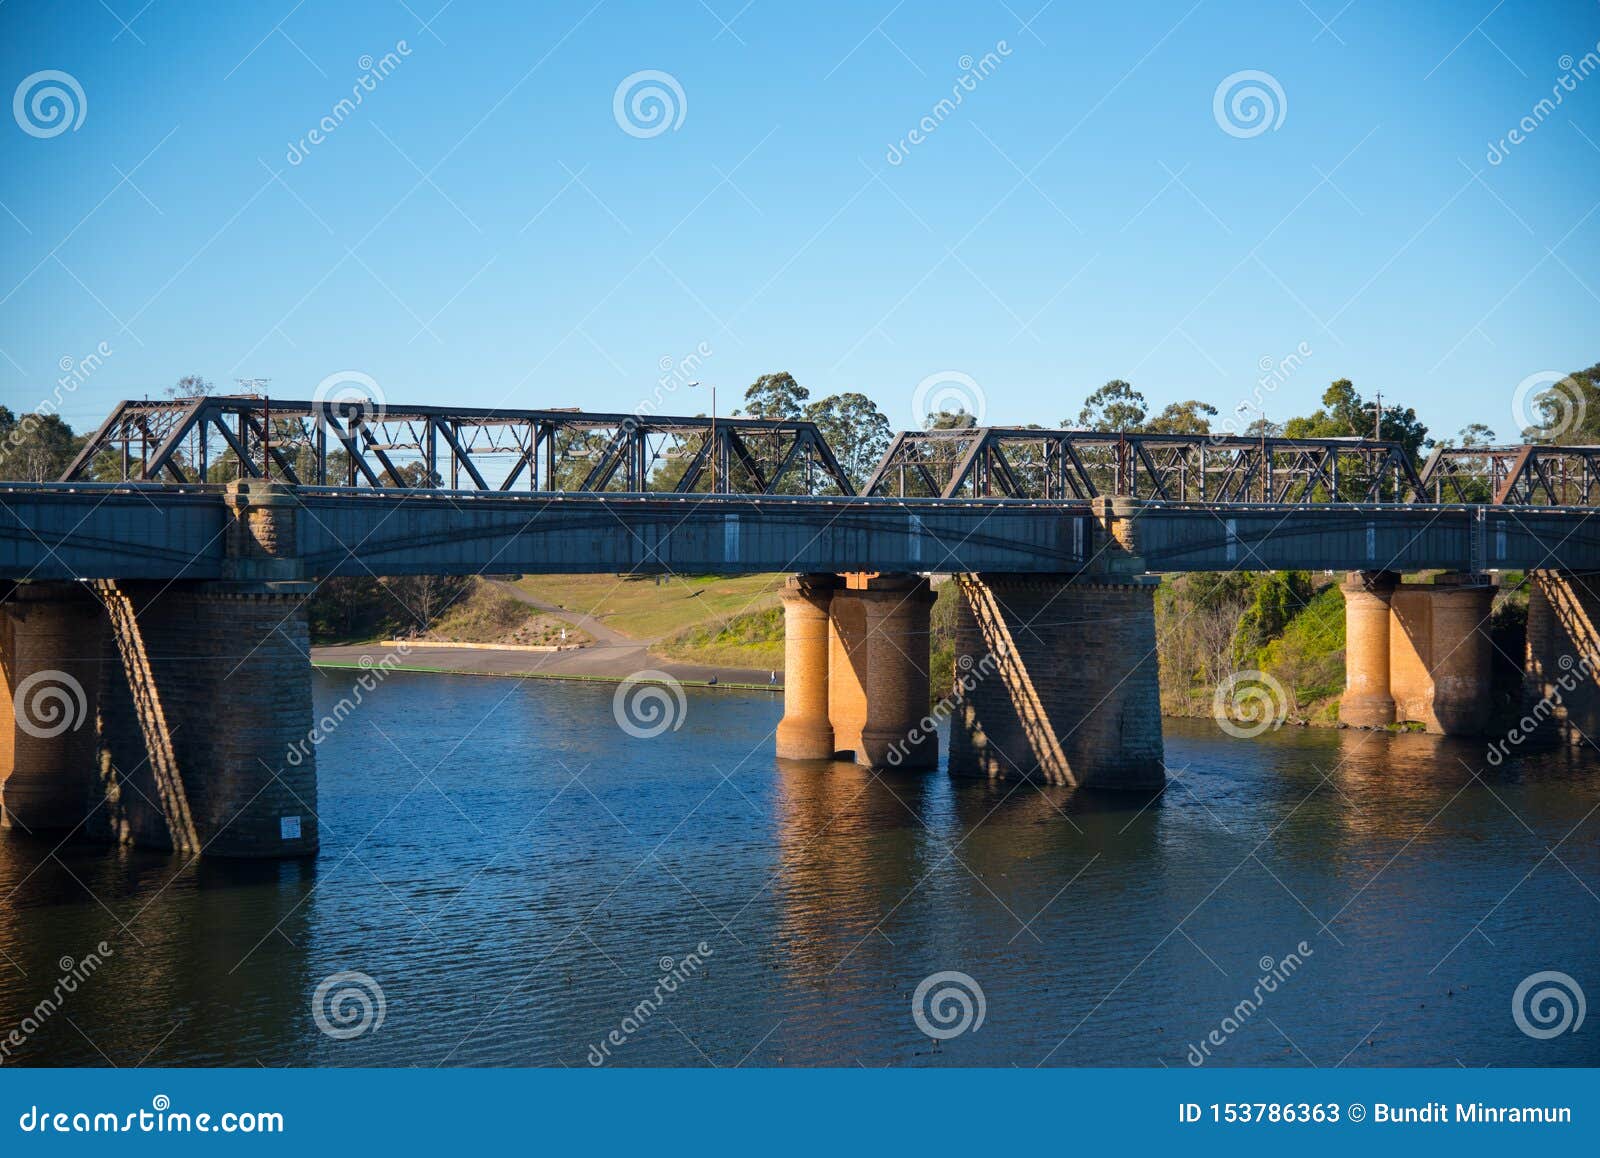 the victoria bridge, over nepean river and officially known as the nepean bridge, is a heritage-listed former railway bridge.